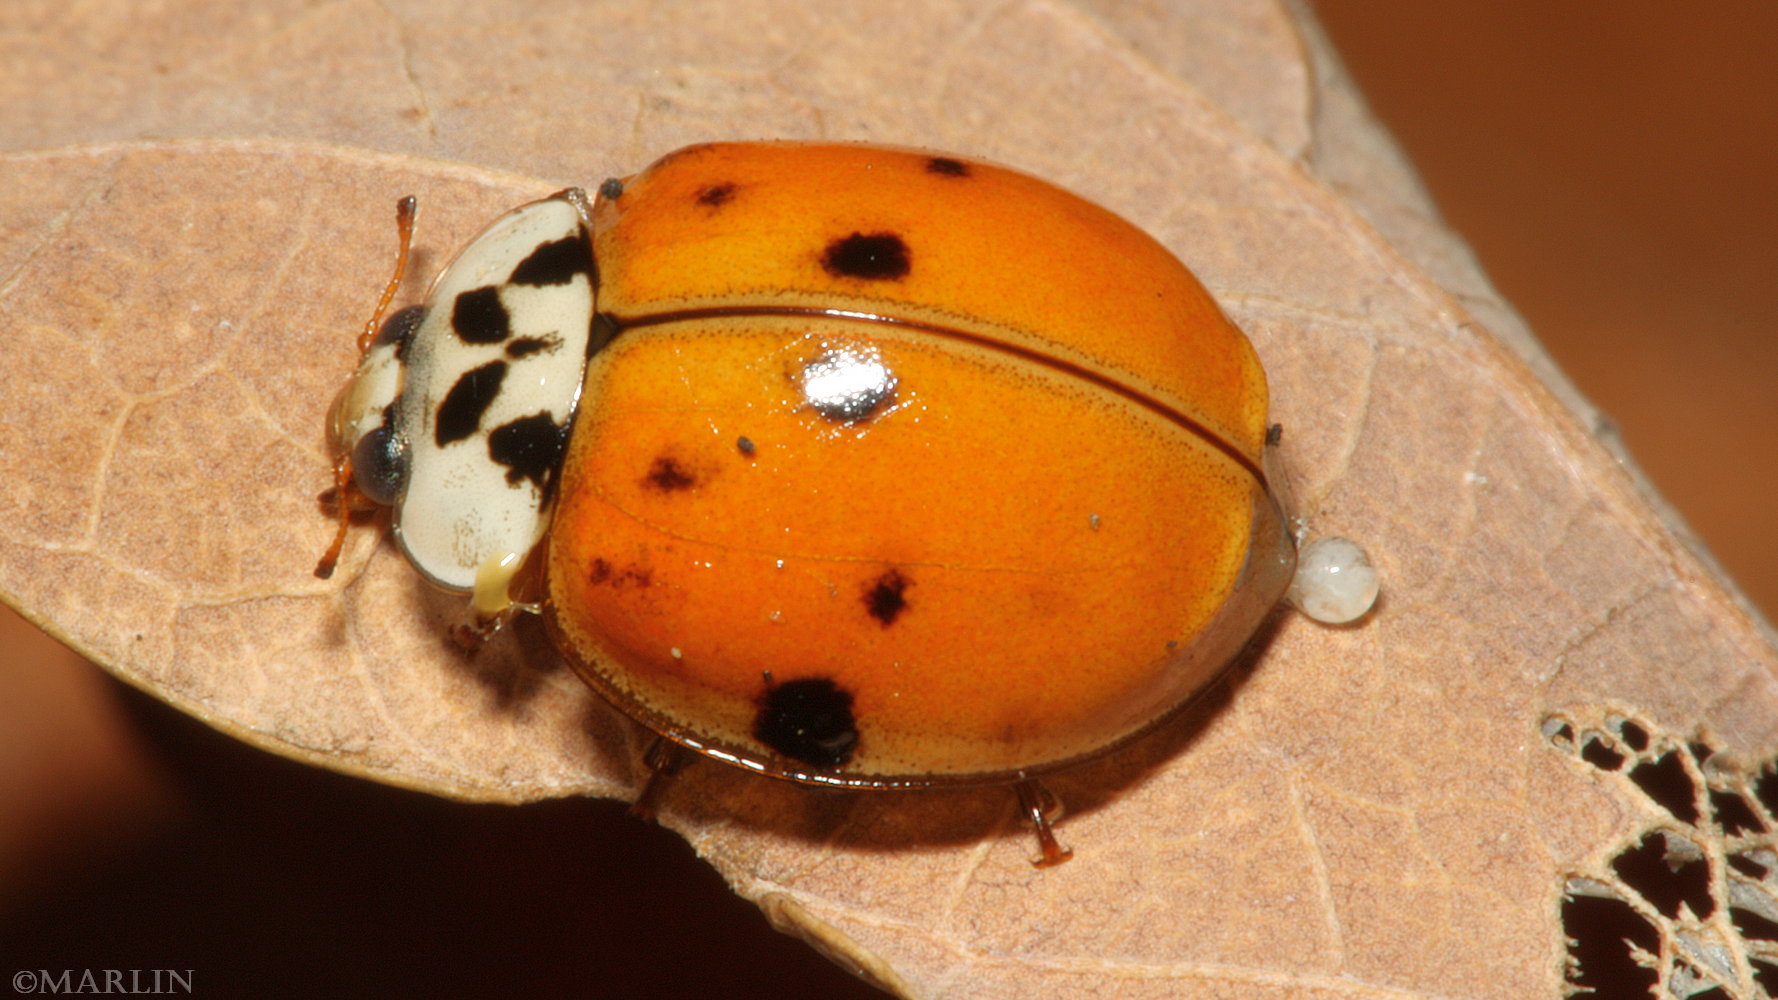 Pink-spotted Lady Beetle - Coleomegilla maculata - North American Insects &  Spiders